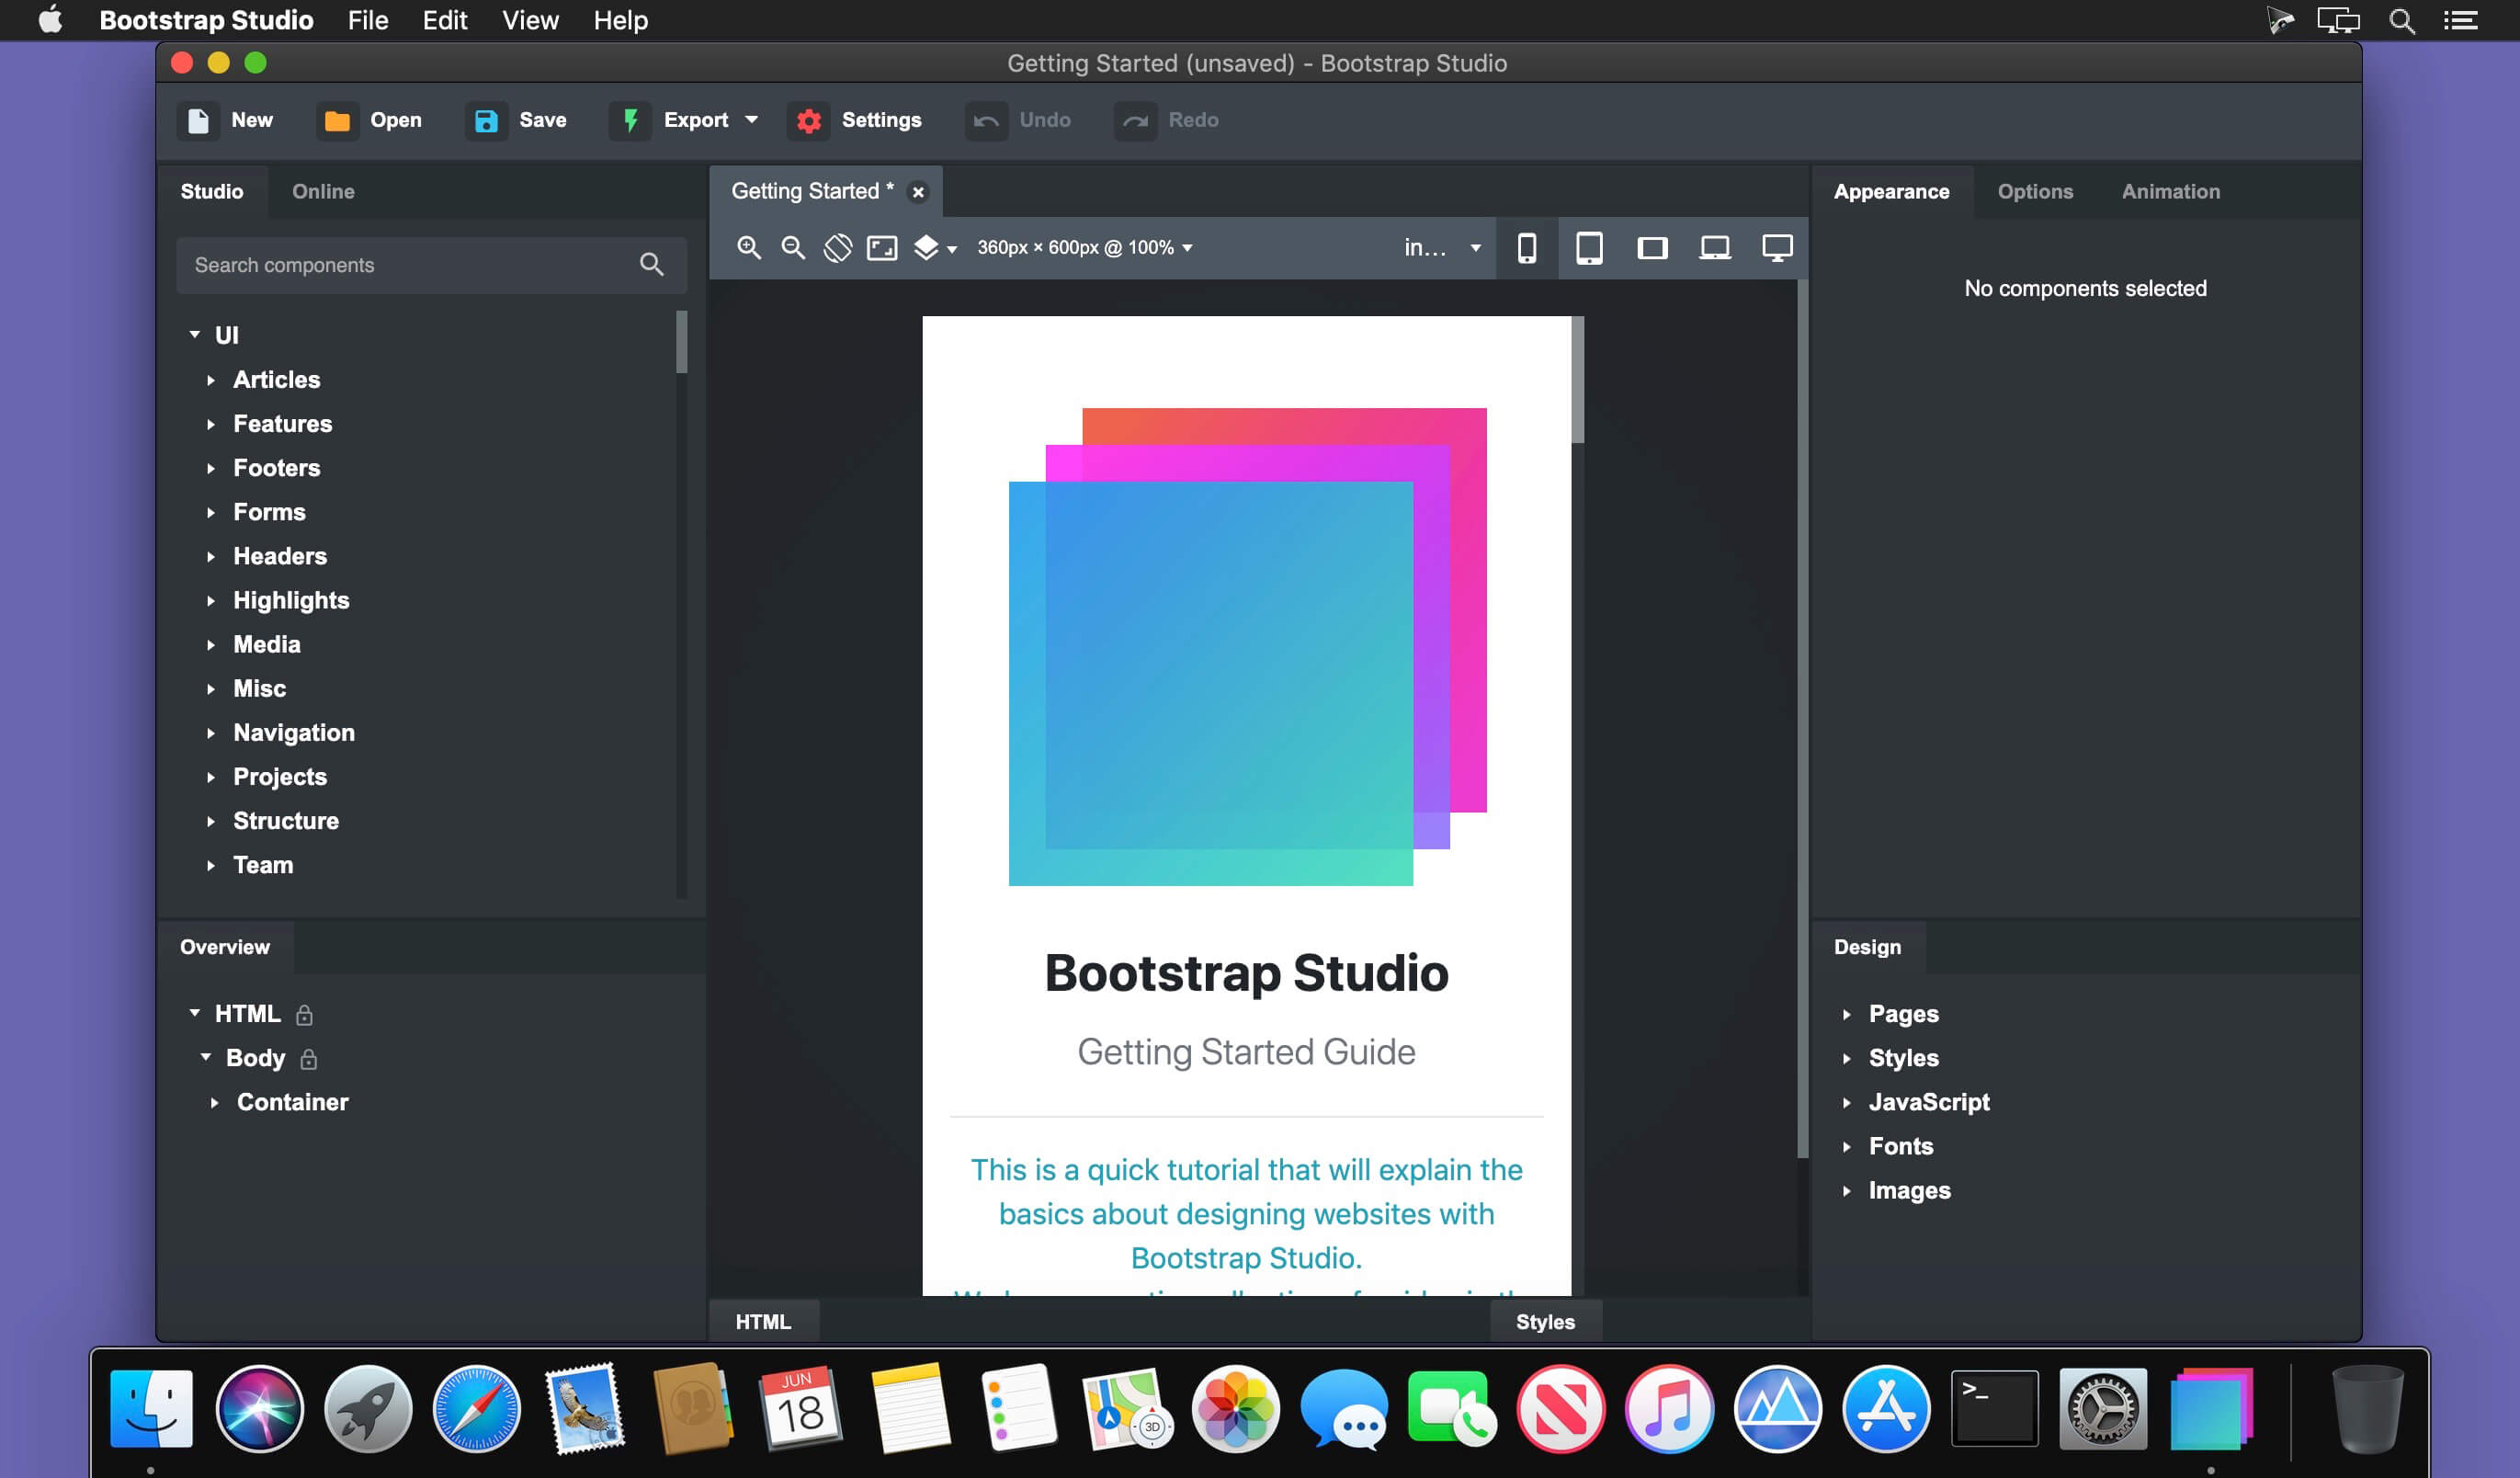 download the new Bootstrap Studio 6.4.5